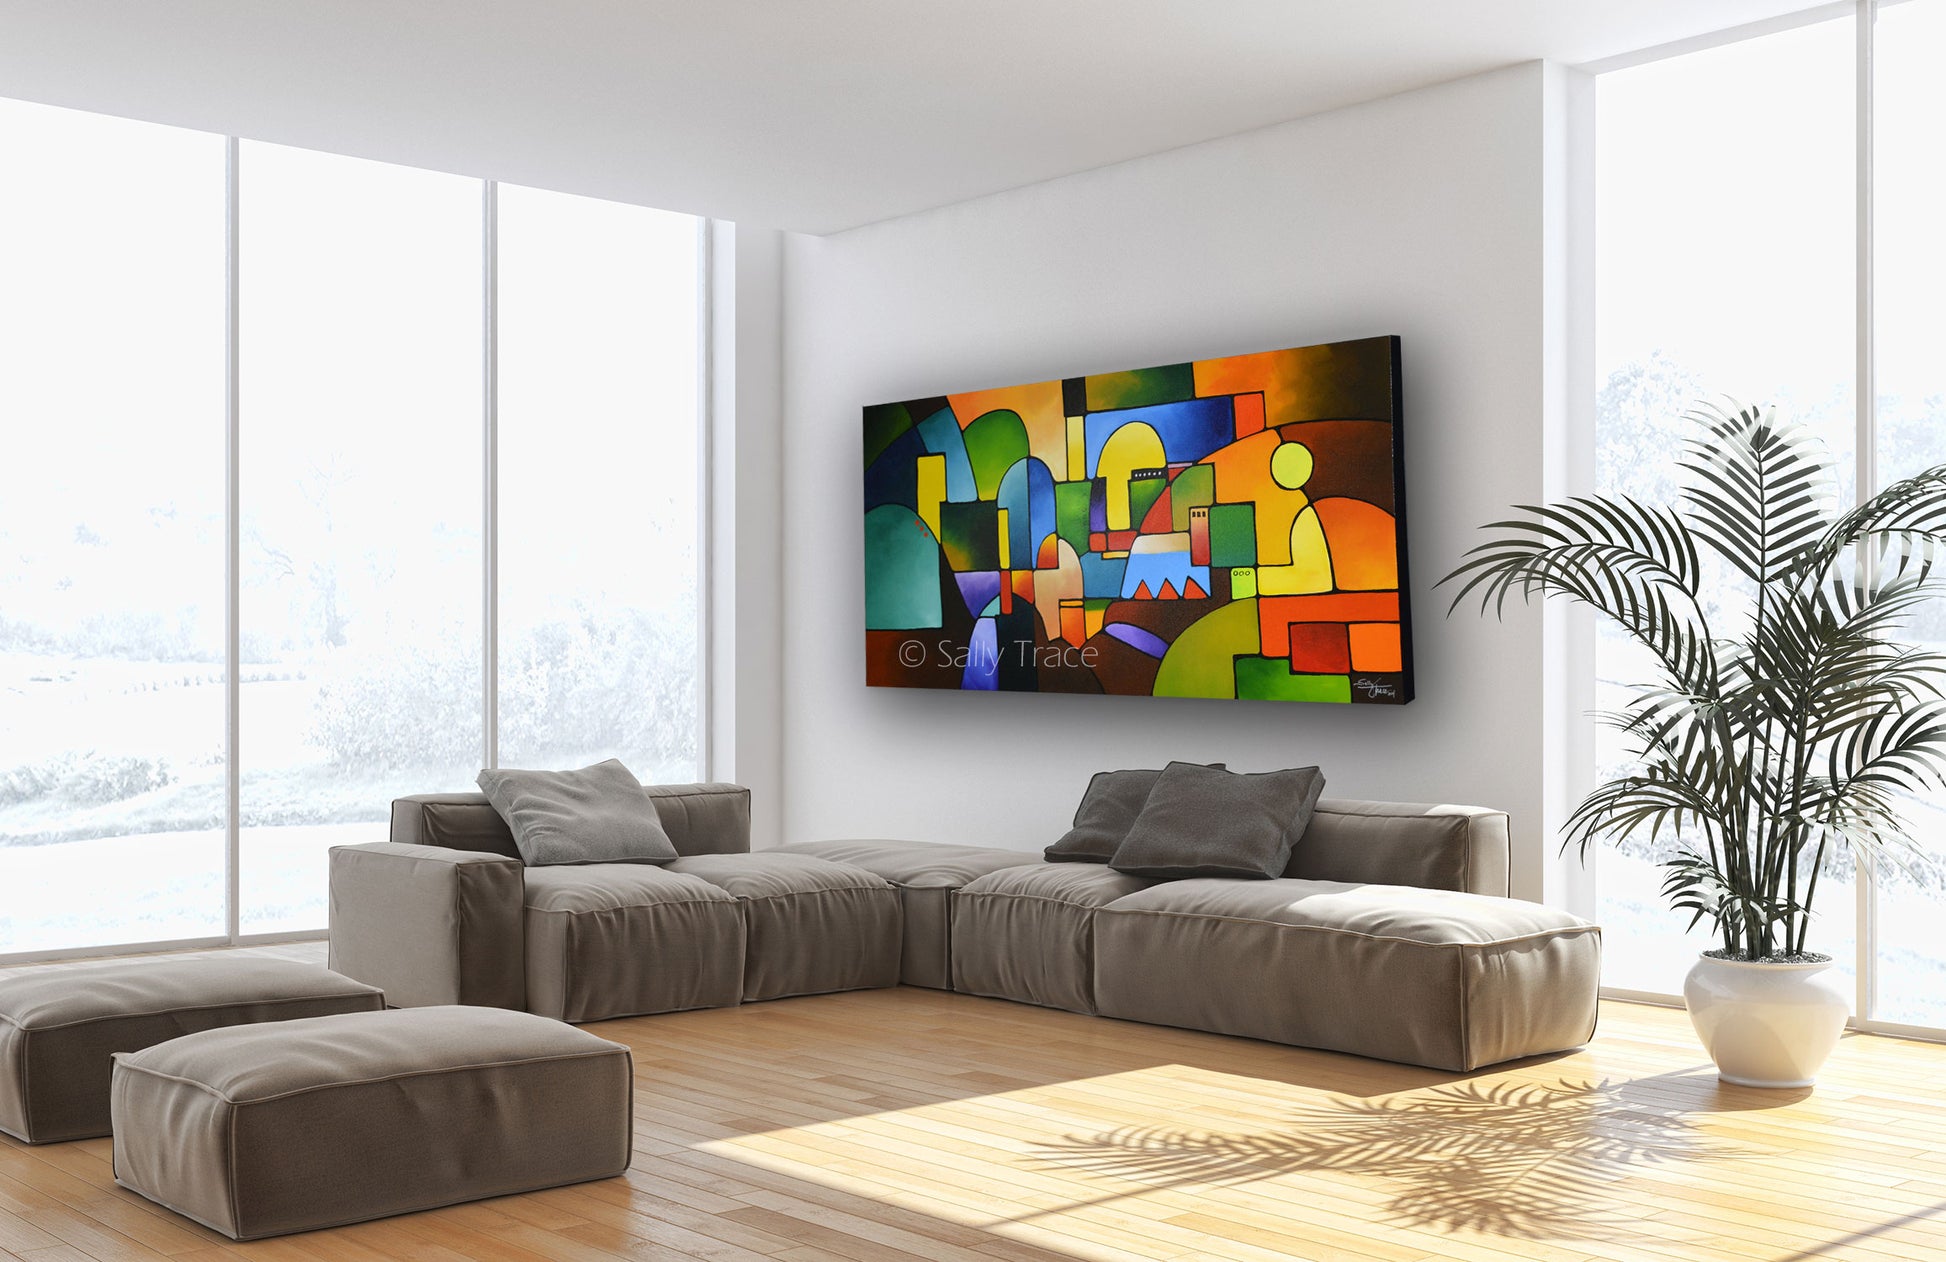 Acrylic paintings for living room, geometric abstraction, large colorful original abstract painting commission by Sally Trace "Urbanity 2", room view, large wall art for dining room